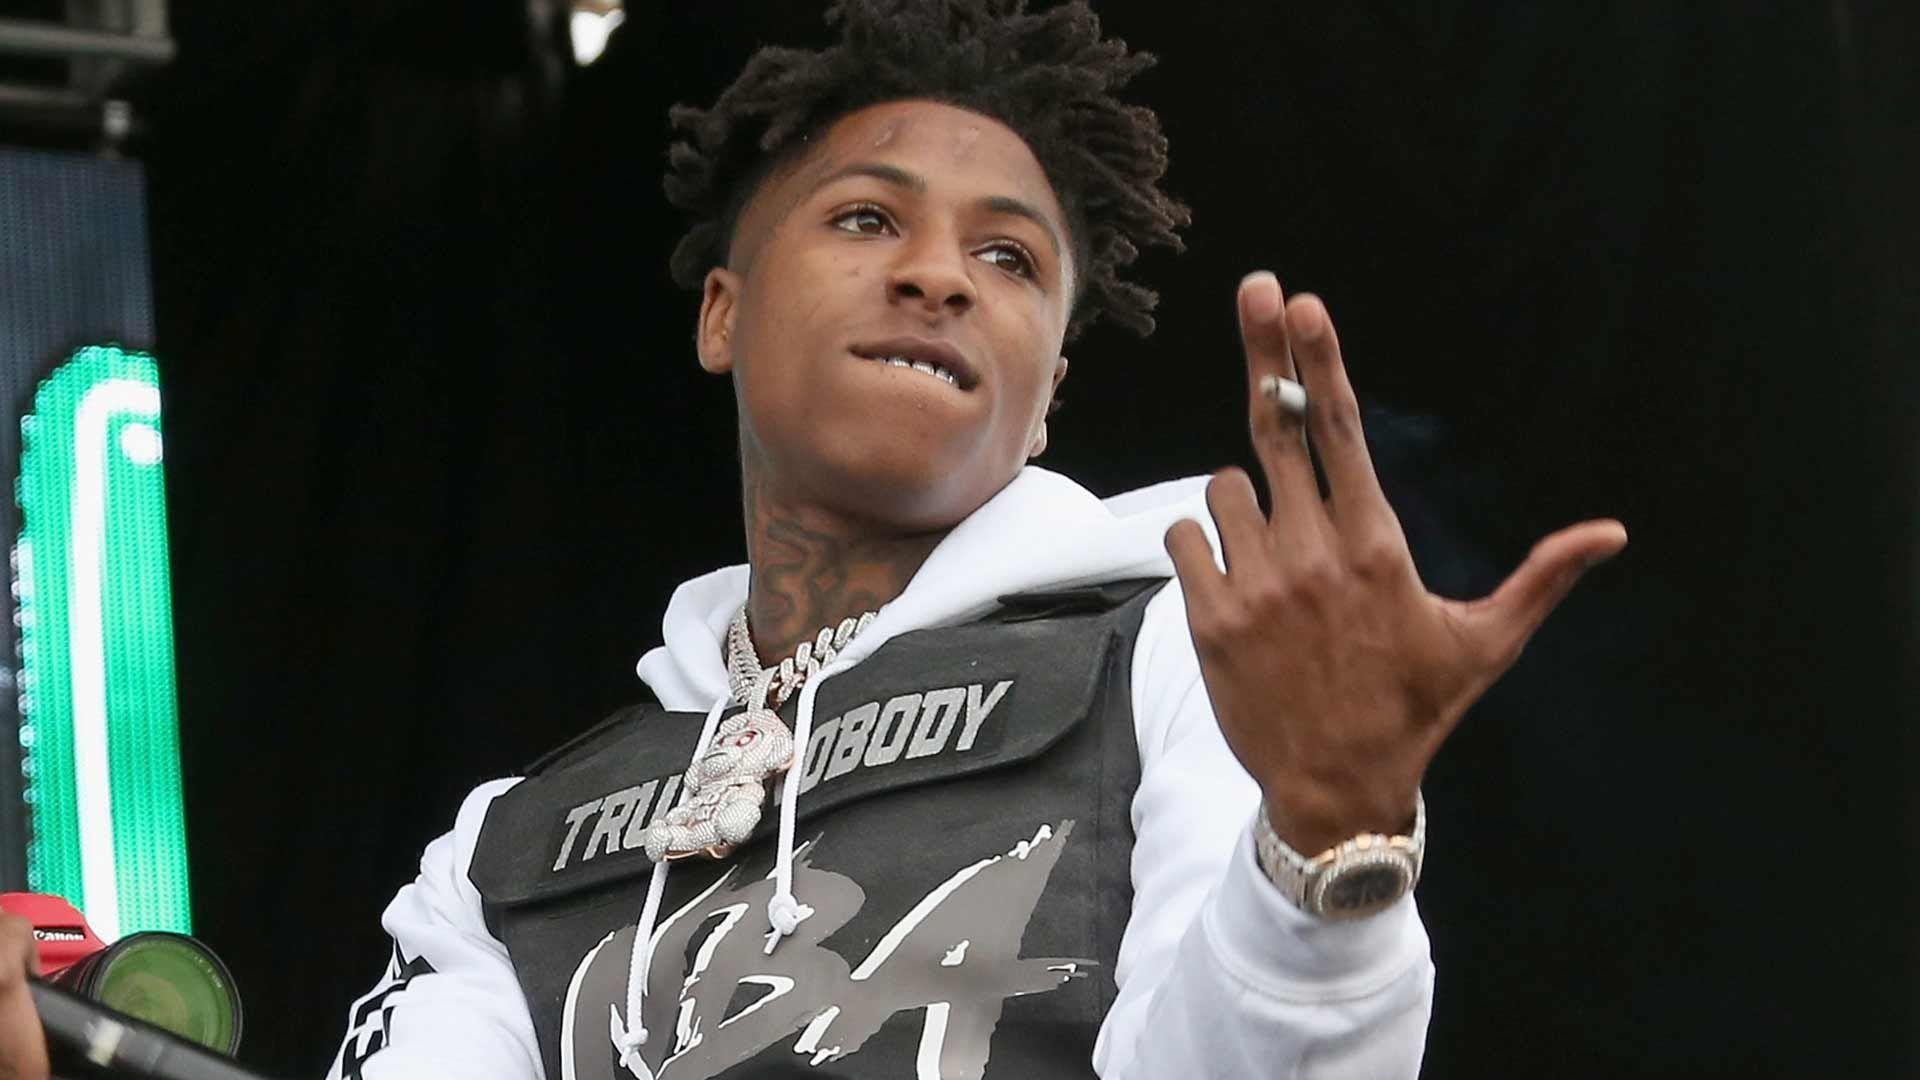 NBA YoungBoy 2019 Wallpapers - Wallpaper Cave